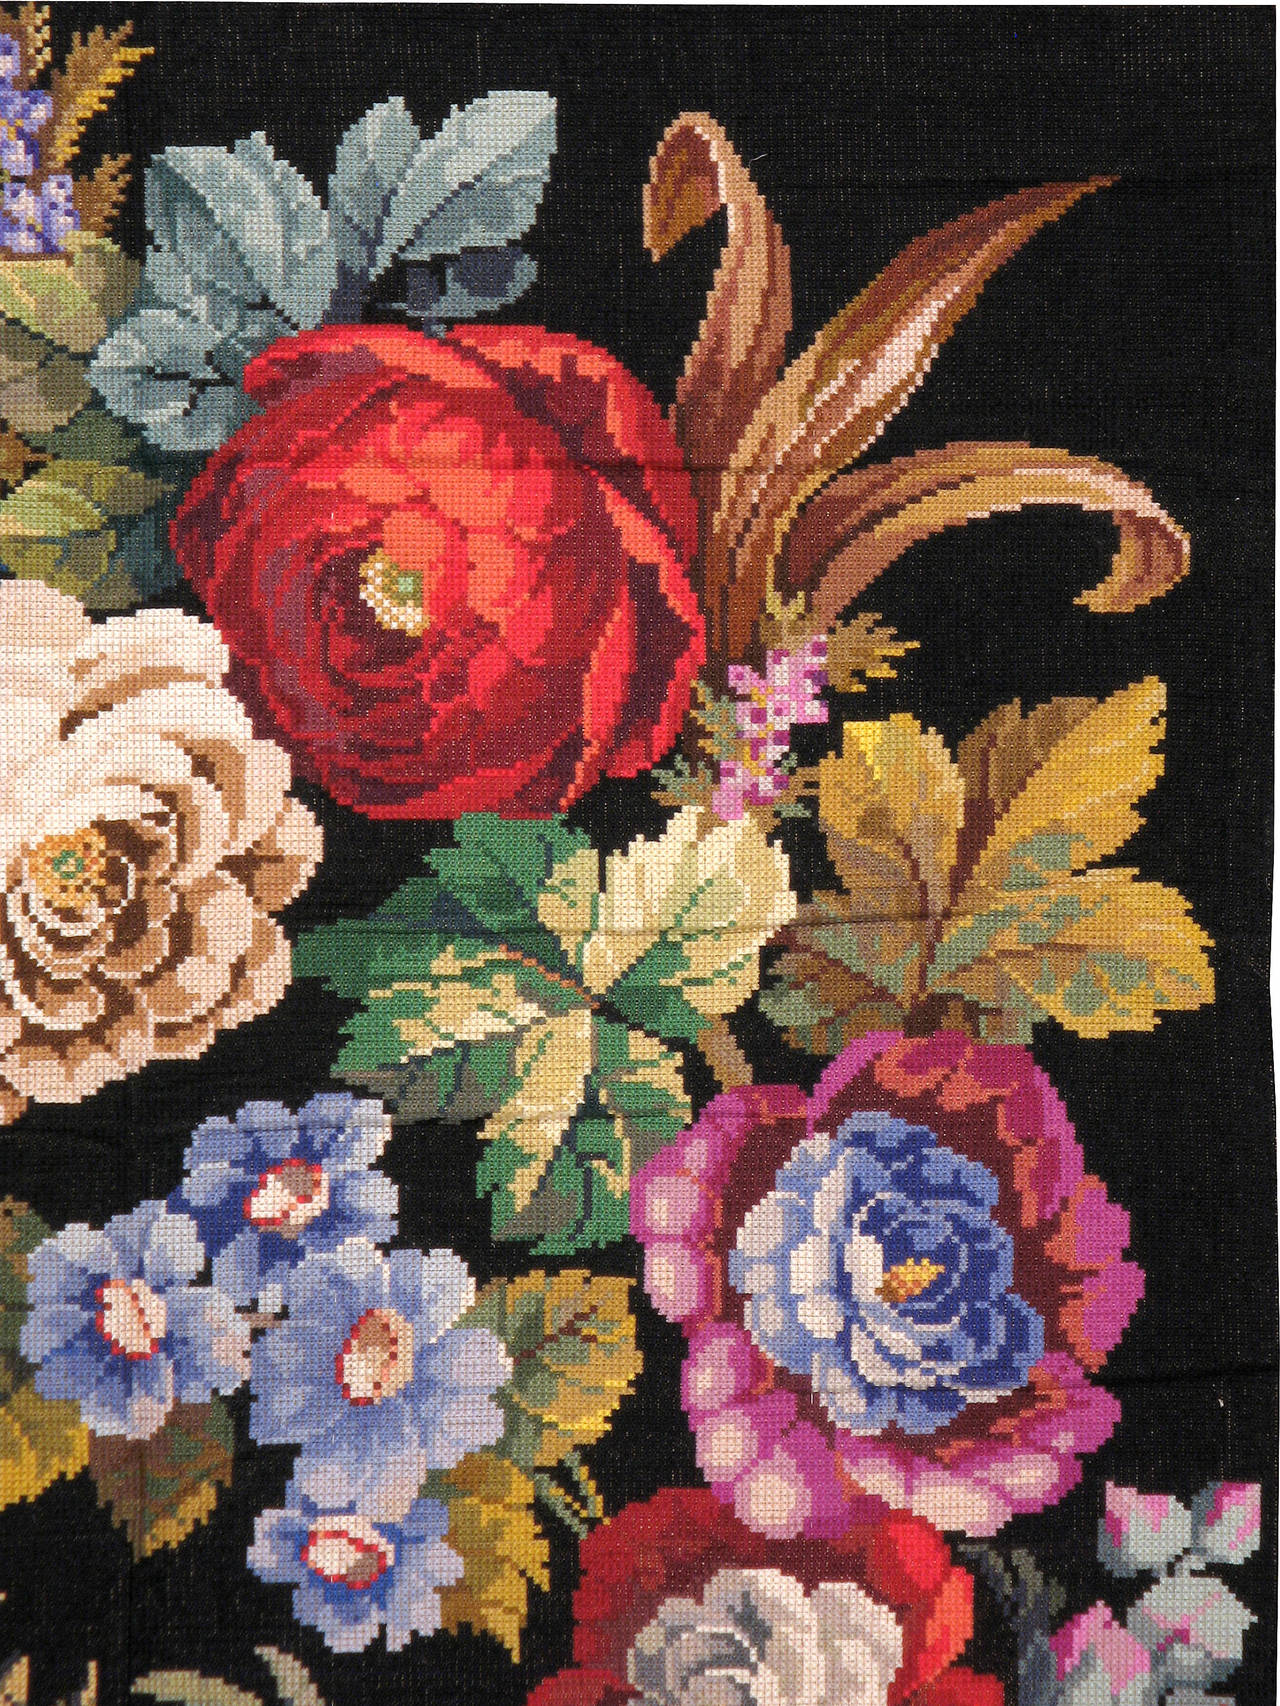 A vintage Portuguese needlepoint carpet from the third quarter of the 20th century with a large, lifelike floral motif over a black background.